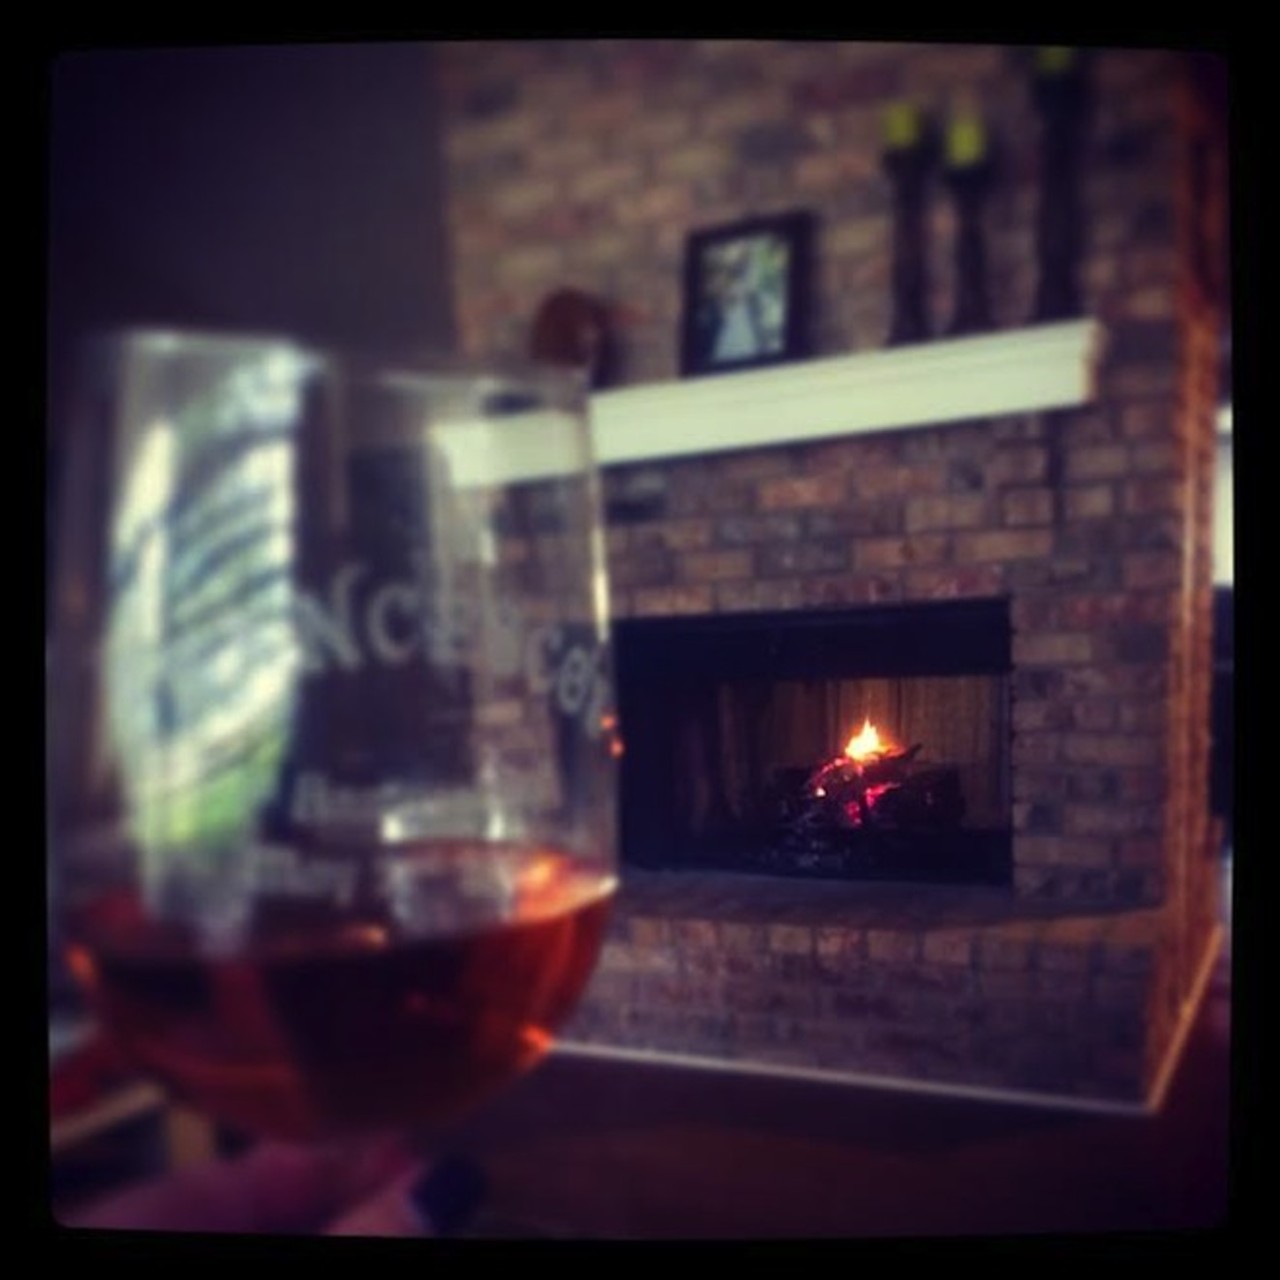 Drinks by the fire